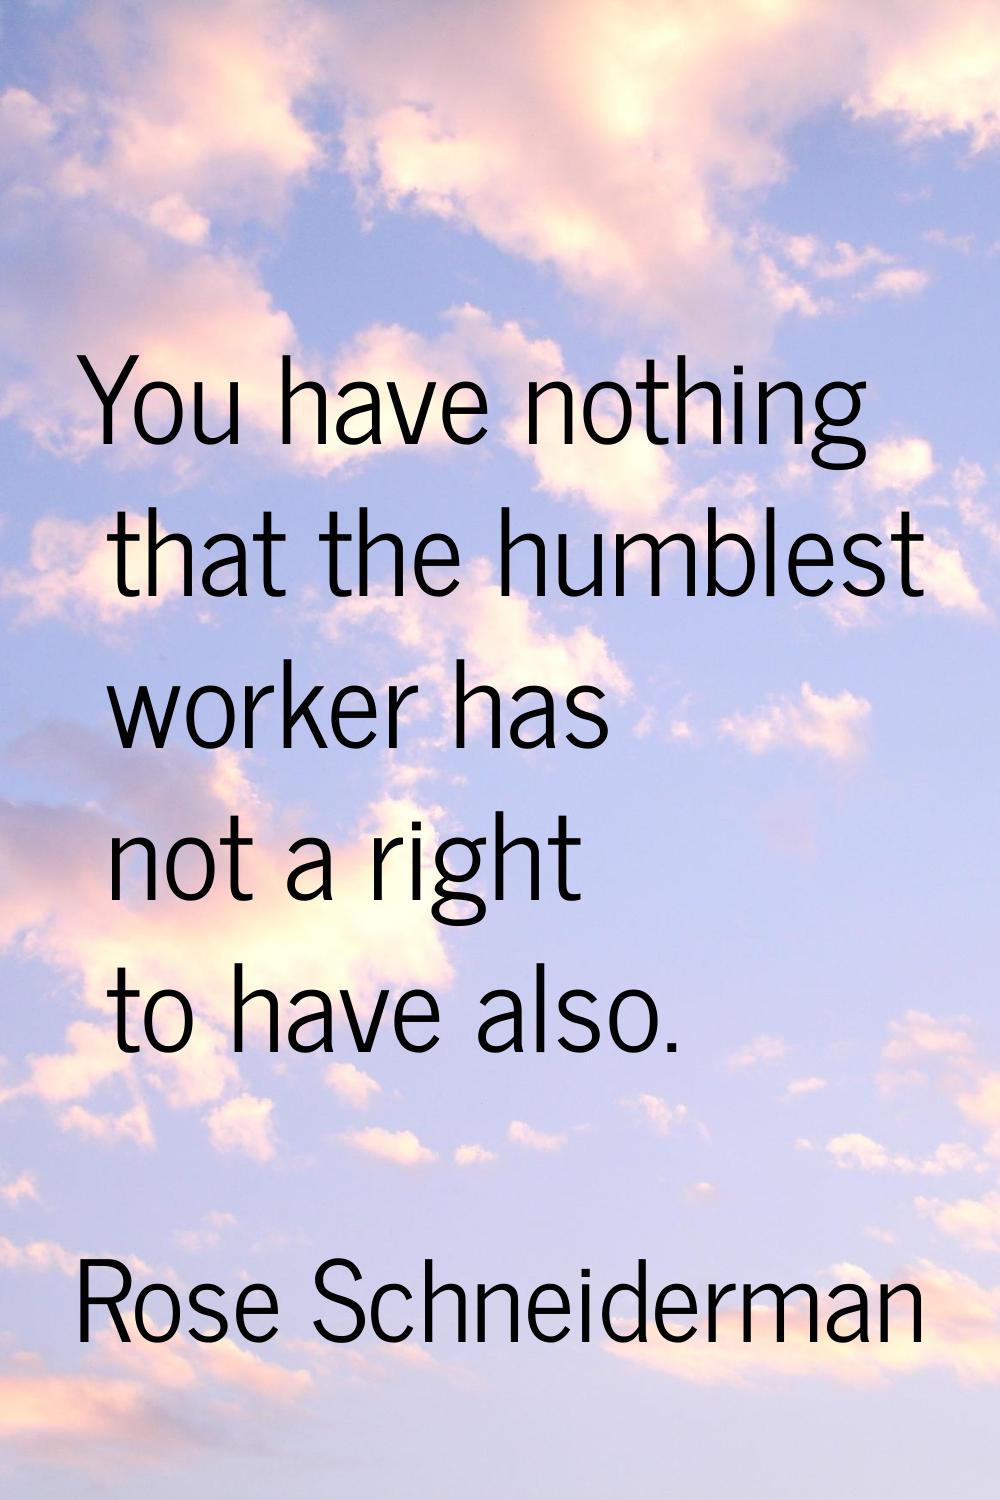 You have nothing that the humblest worker has not a right to have also.